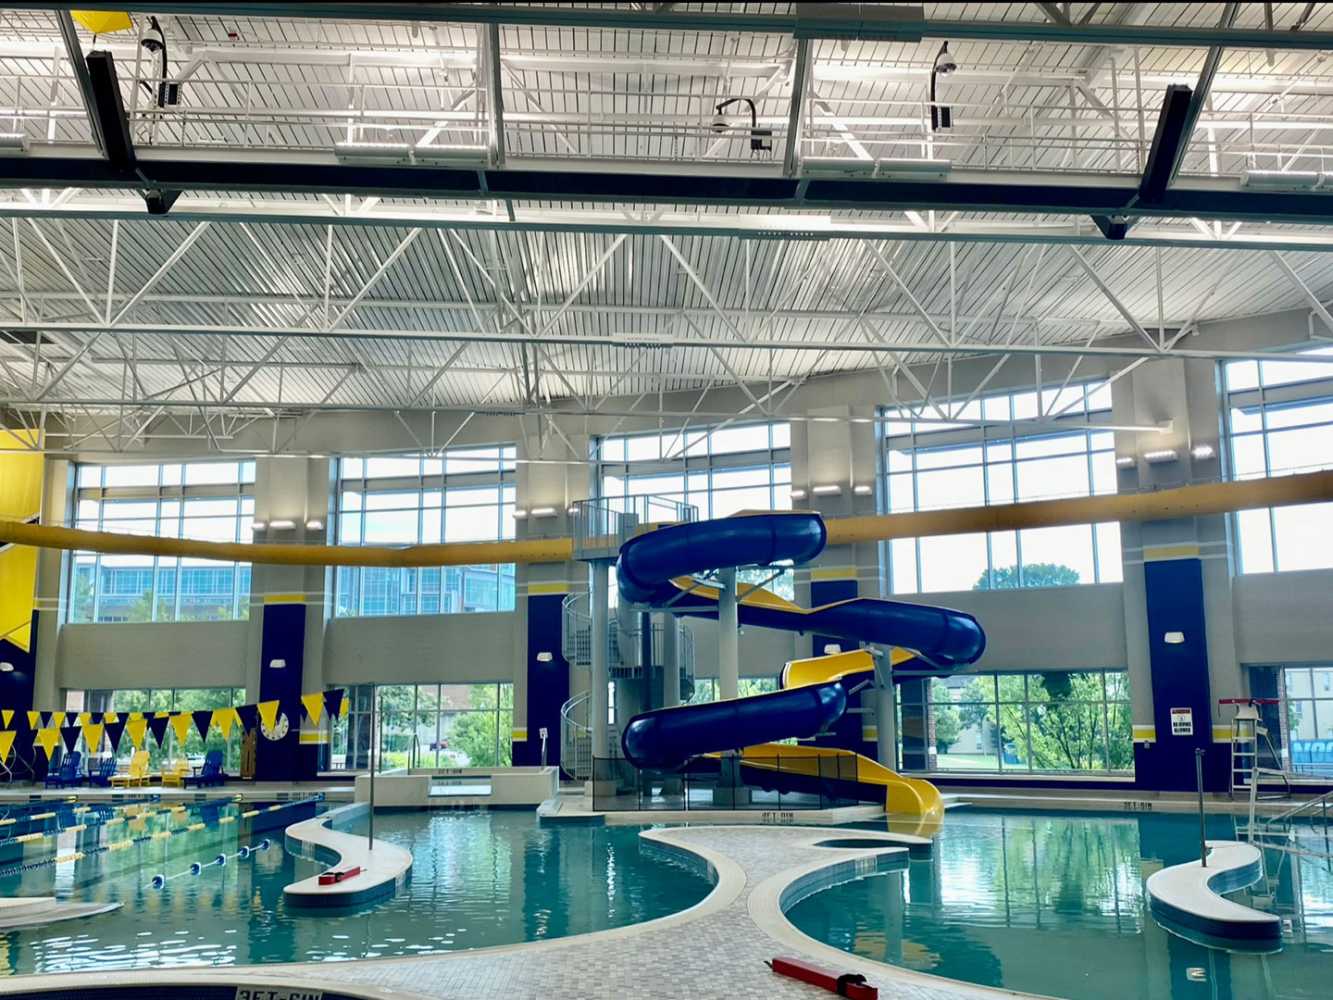 The Aquatics and Recreation Centre Pool at University of Tennessee – Chattanooga